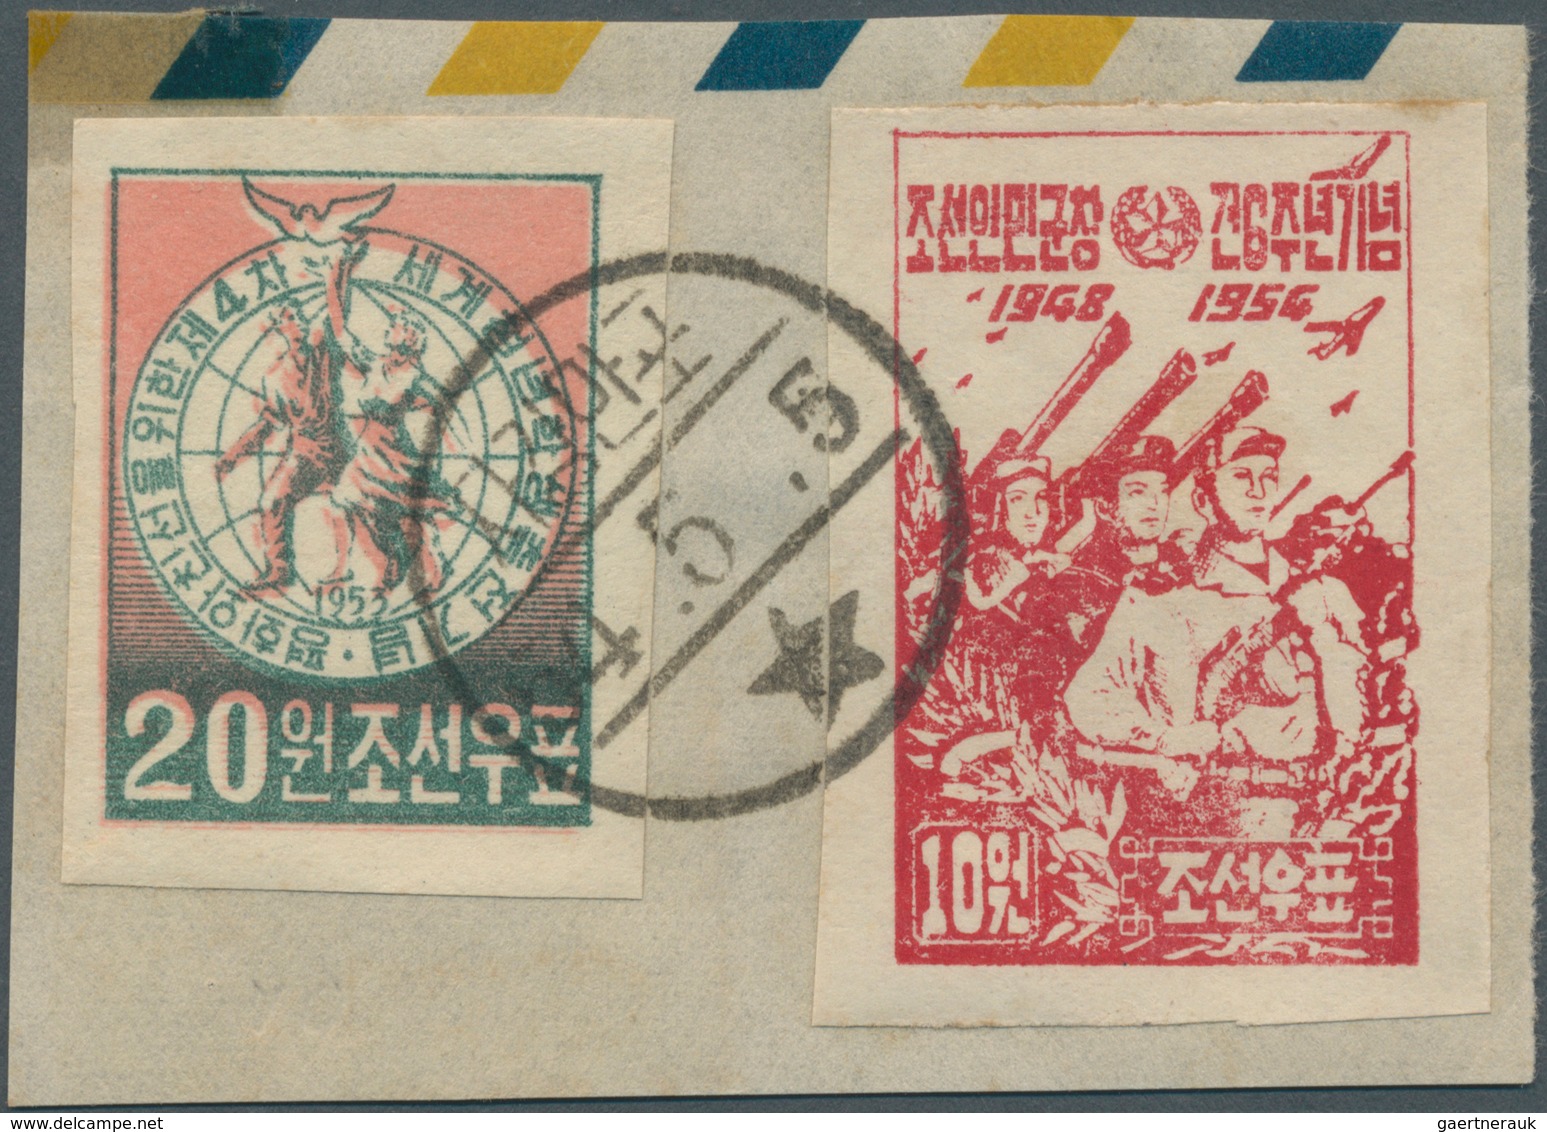 Korea-Nord: 1954, PA 6th Anniversary 10 W. Red Imperforated With 1953 4th World Youth Games 20 W. Im - Korea (Nord-)